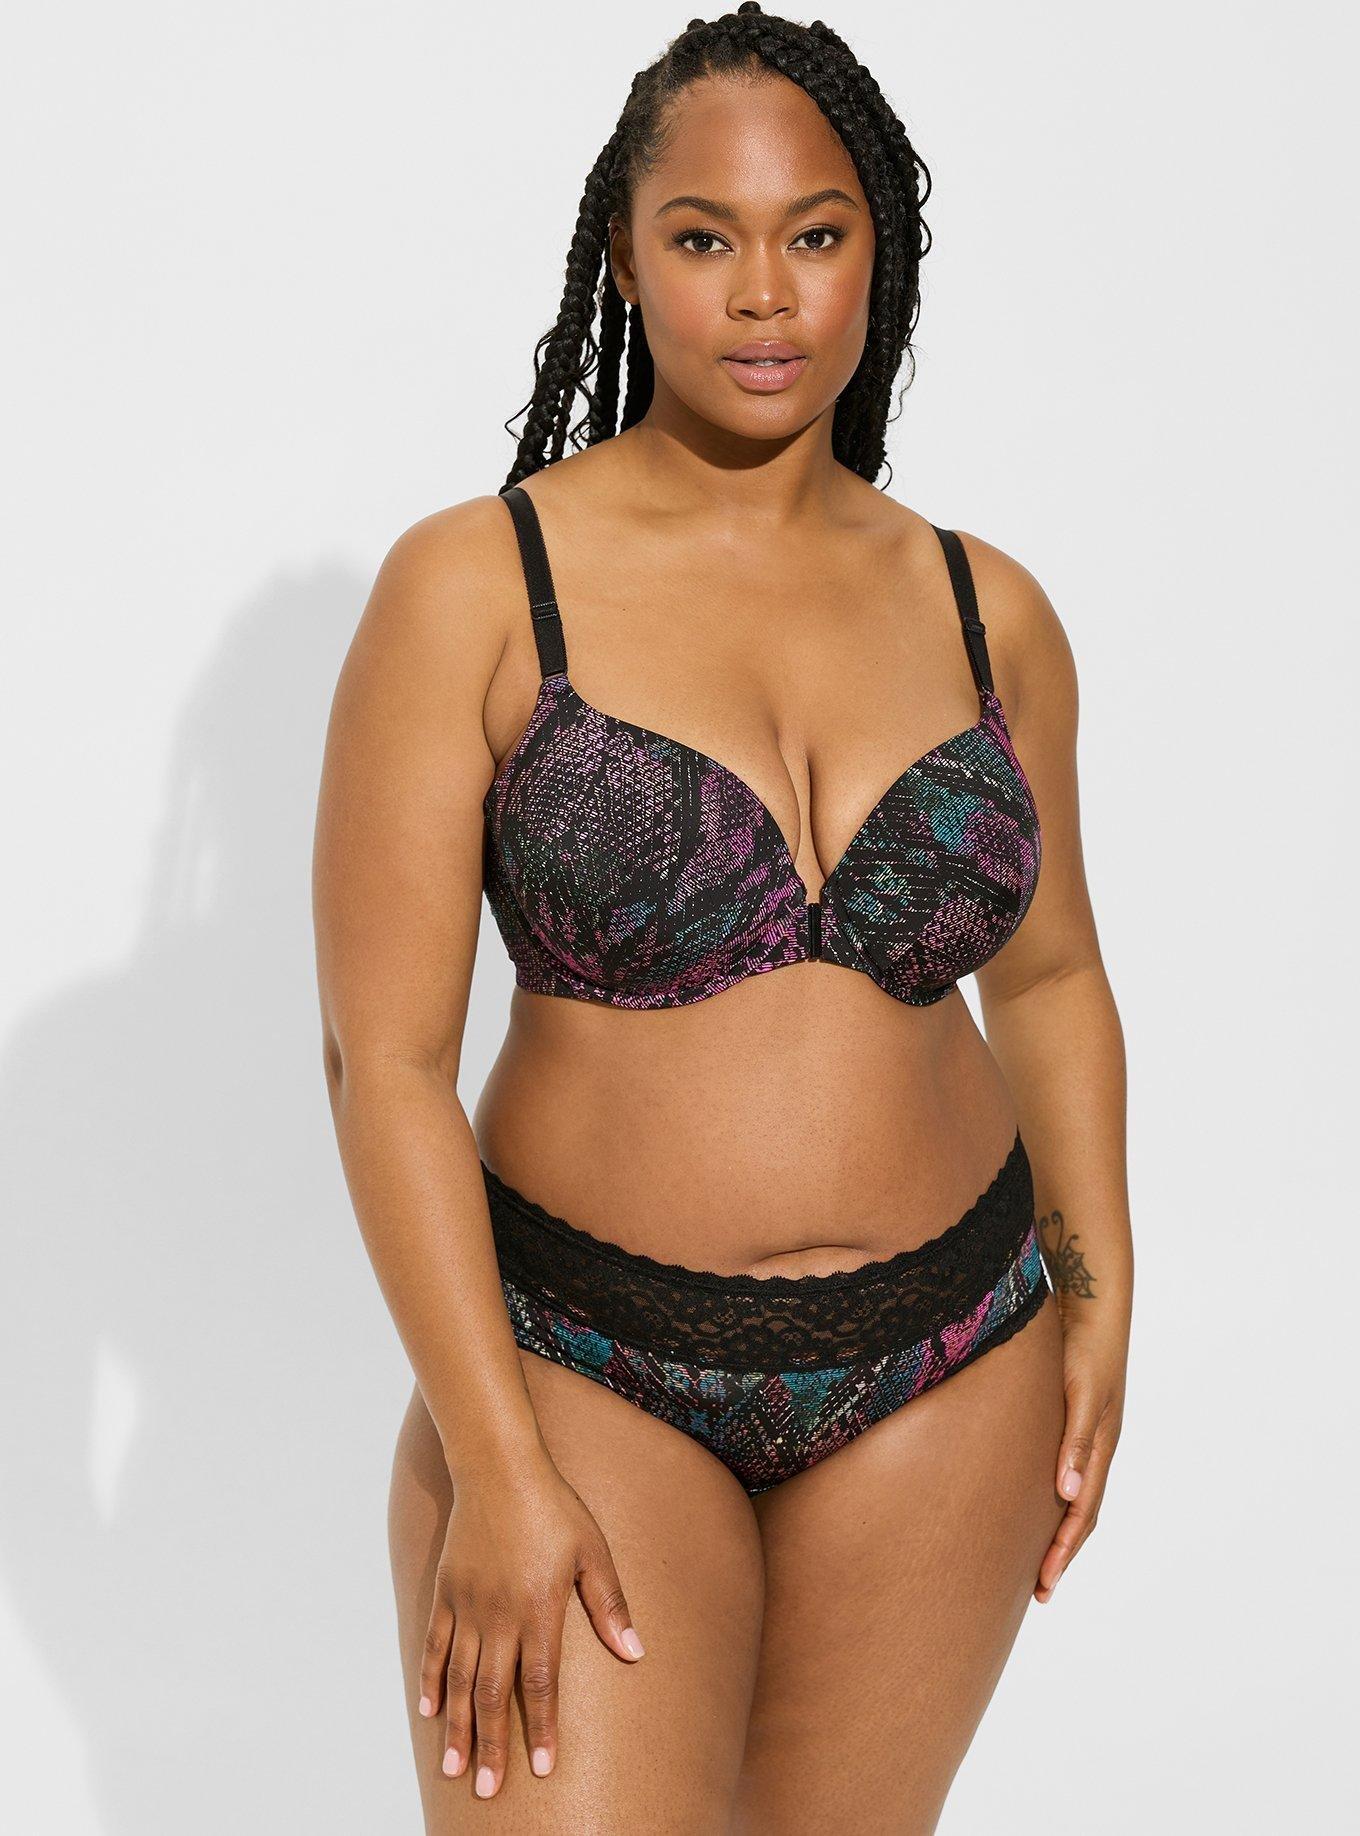 HELP! Need someone who fits a 40DDD/38F Cacique bra who also fits